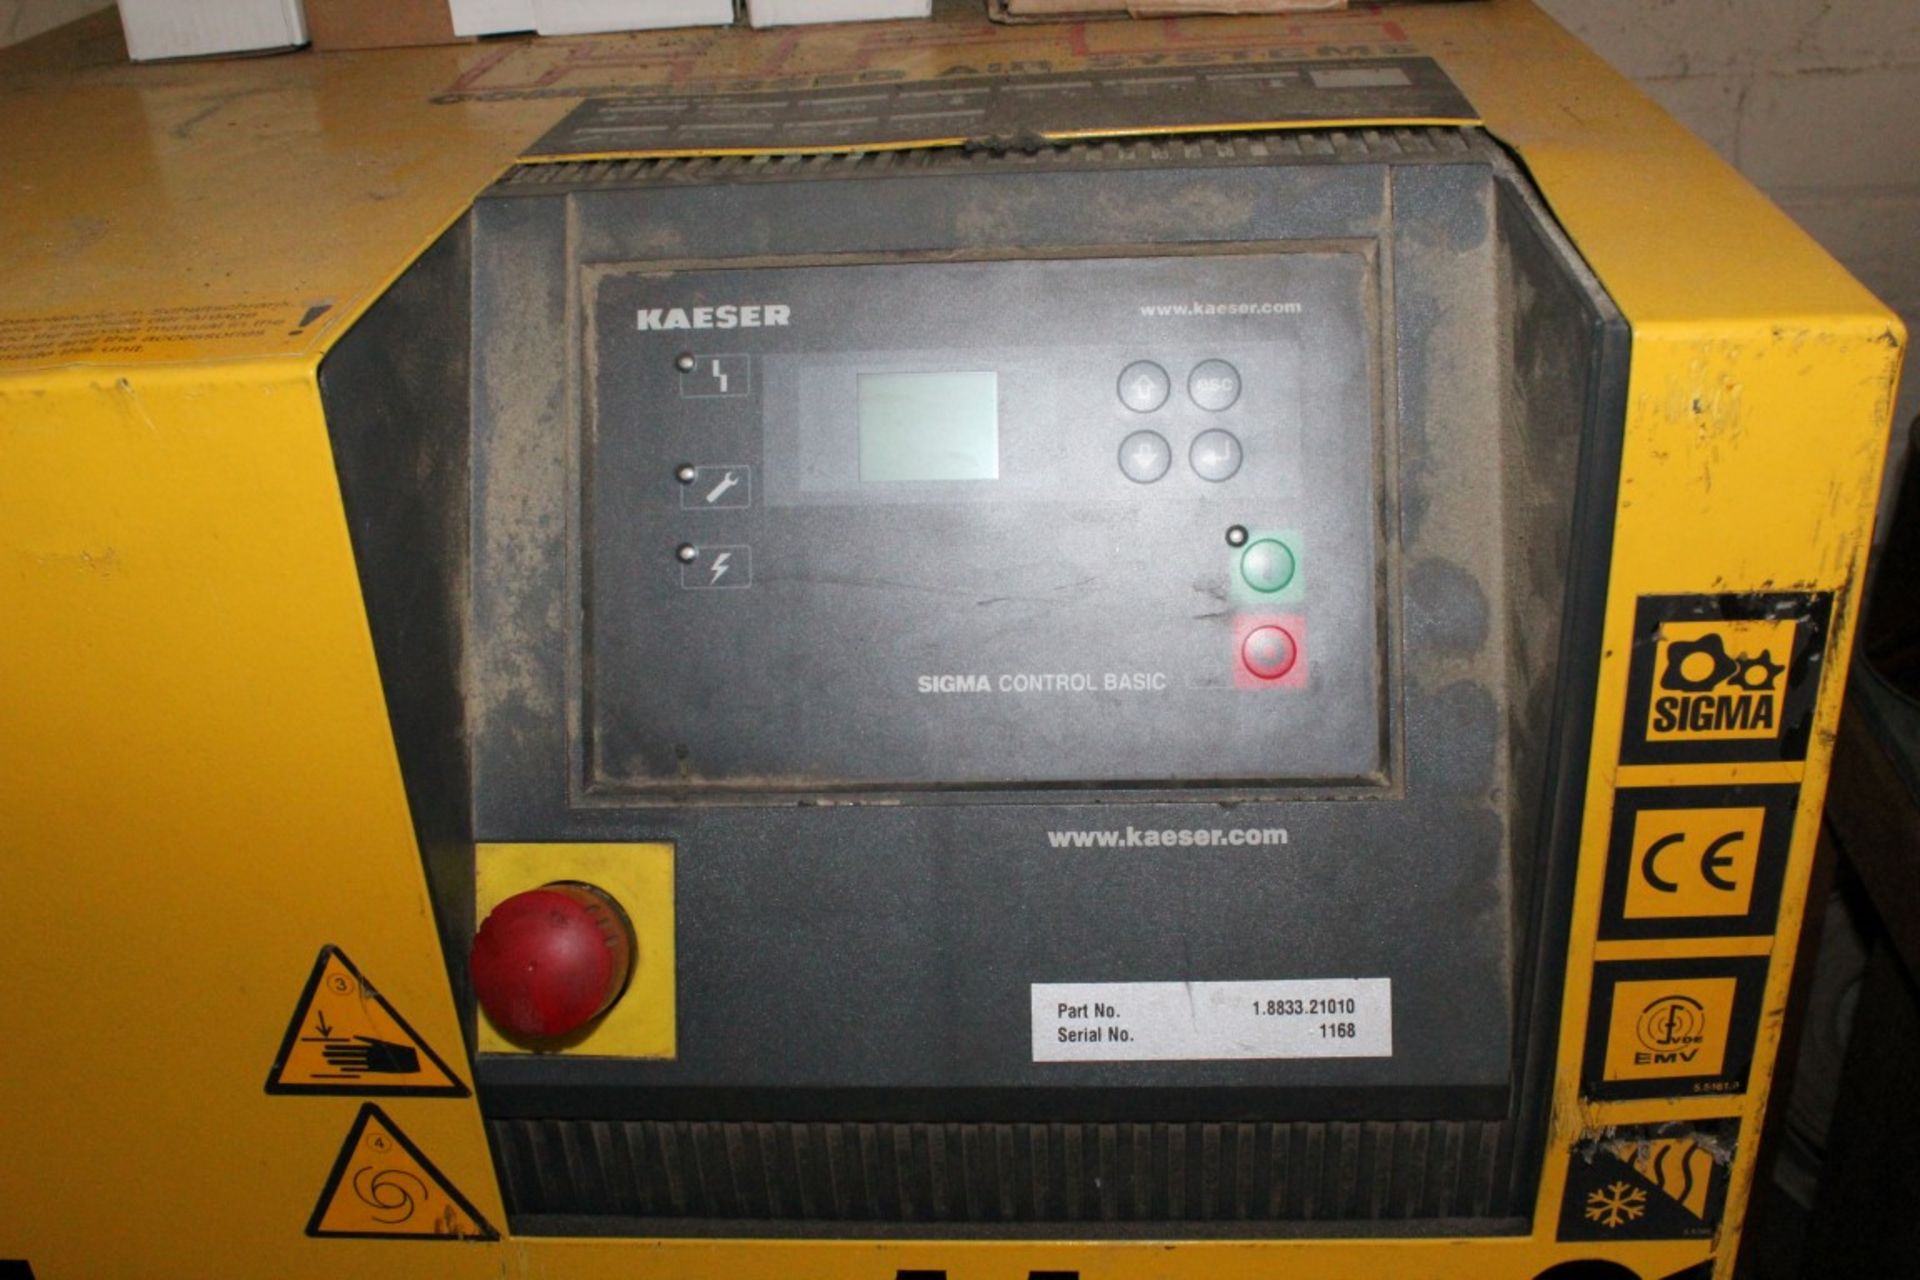 1 x Kaeser Airtower 11 Air Drying Screw Compressor - 3 Phase Power - Ref R025 - CL151 - Location: - Image 3 of 6